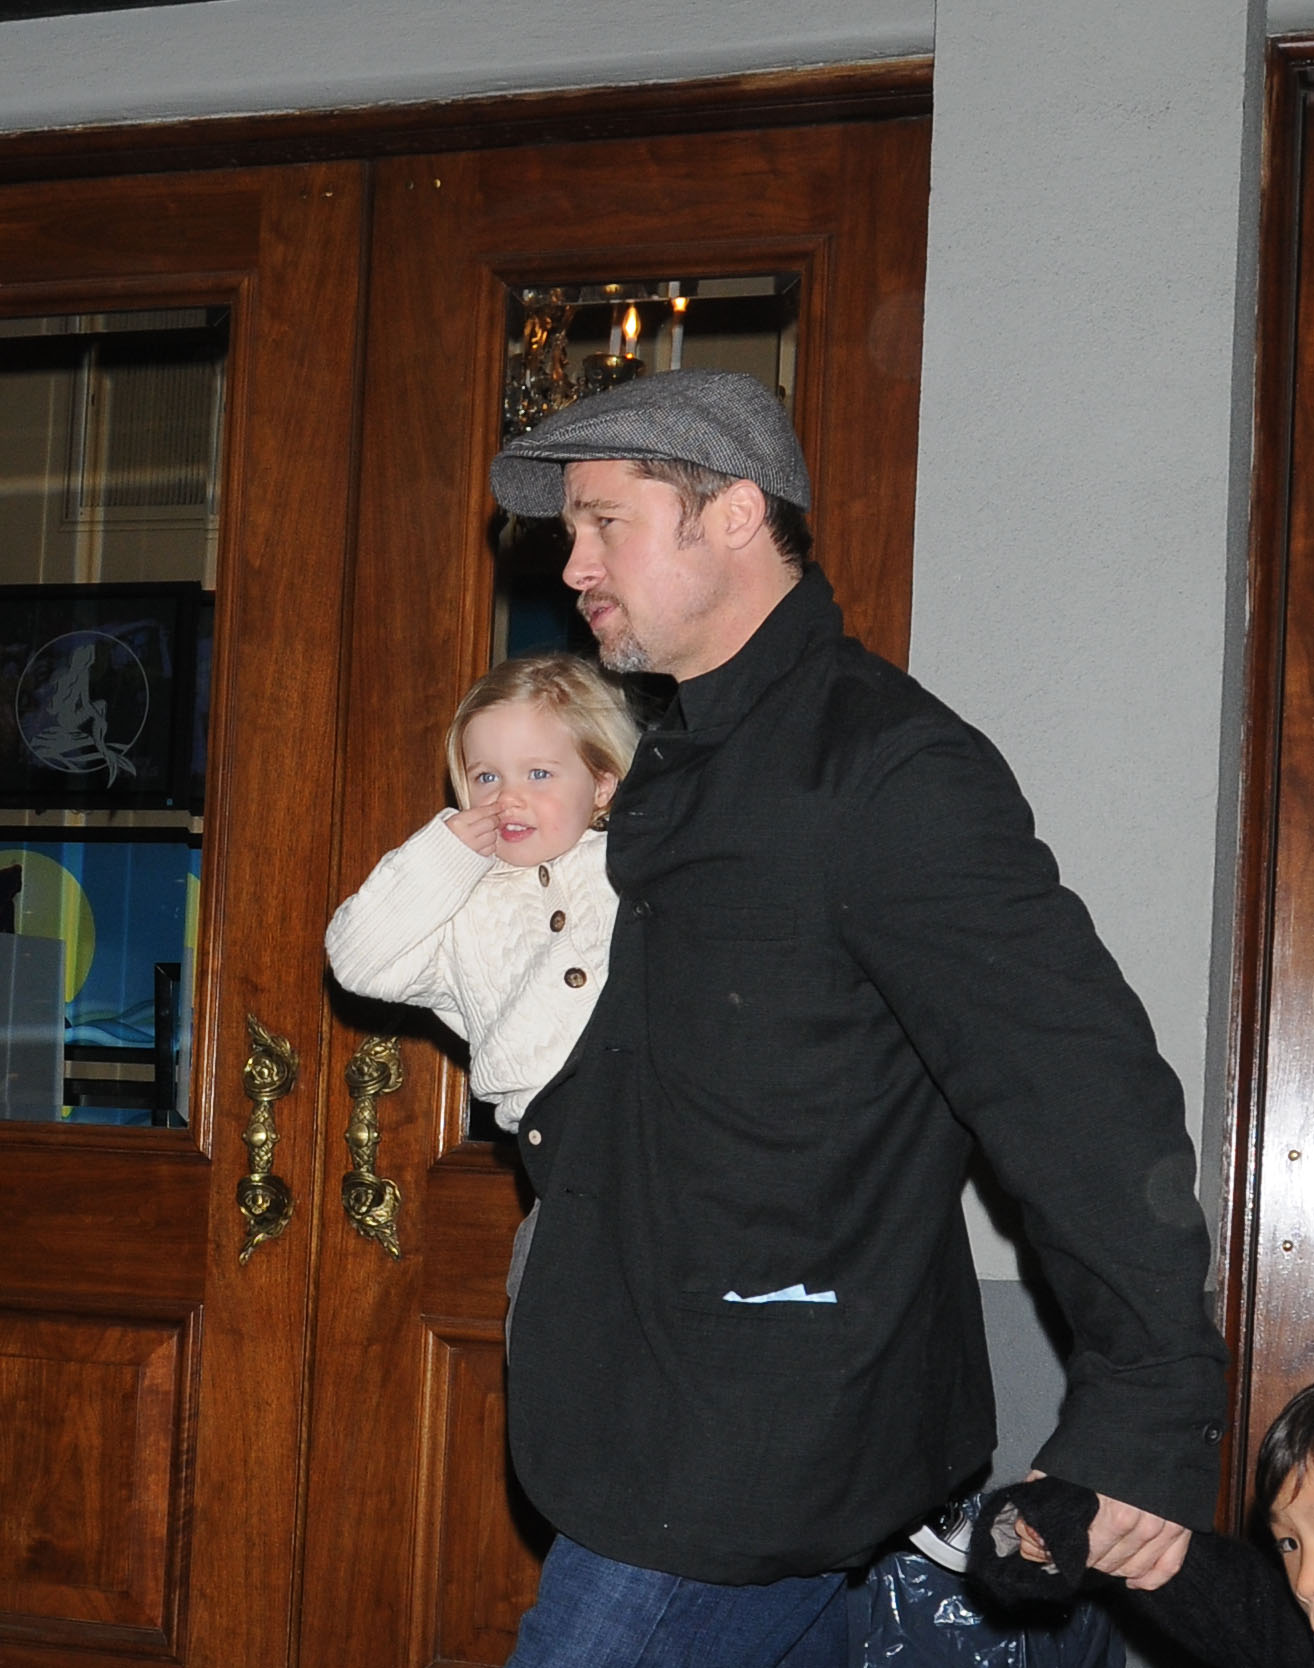 Shiloh Jolie-Pitt, Brad Pitt and Maddox Jolie-Pitt (slightly seen) spotted out in New York City on February 25, 2009 | Source: Getty Images